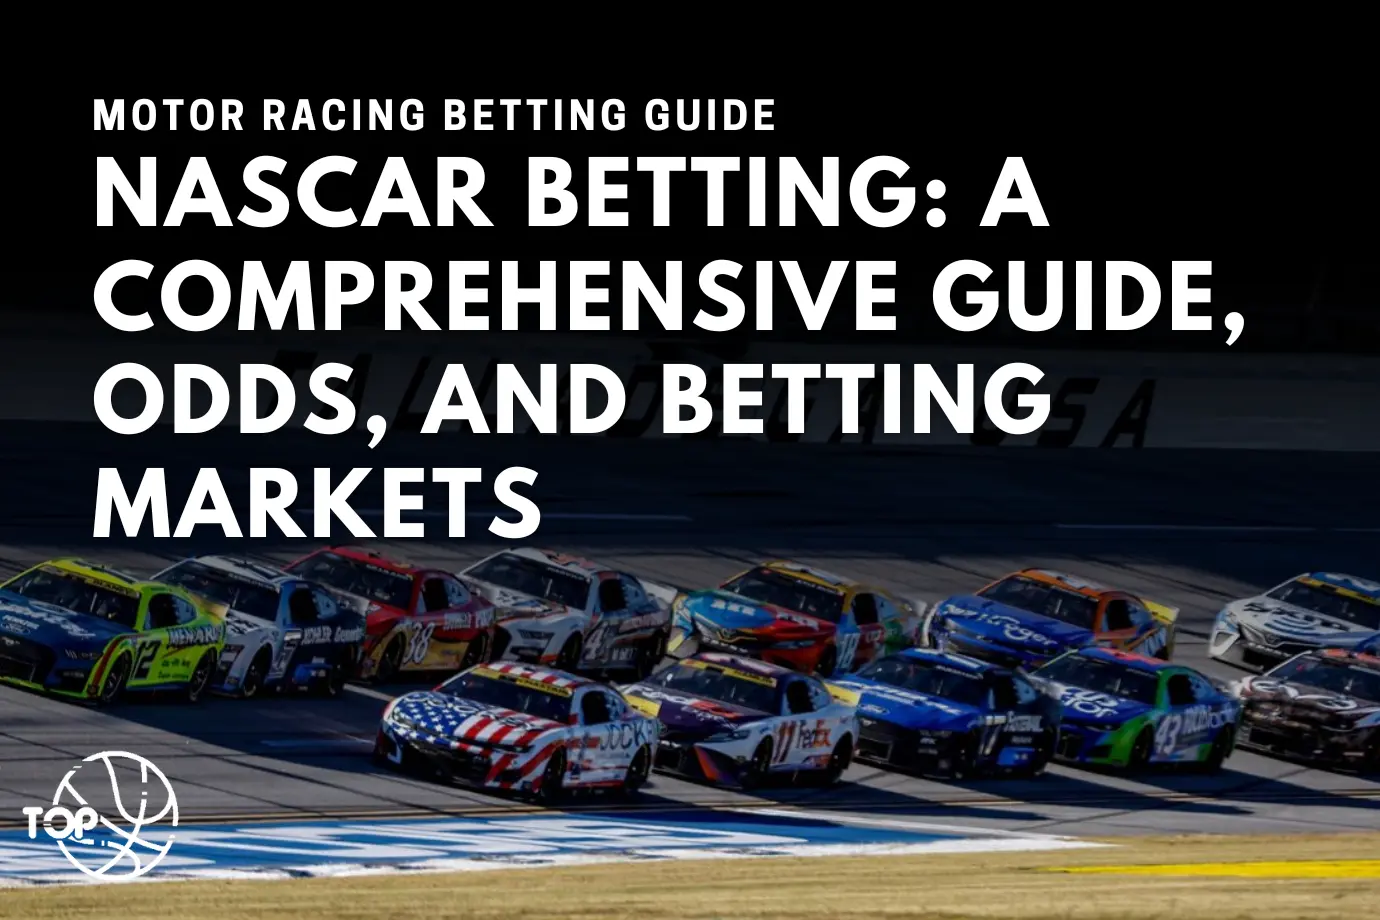 NASCAR Betting: A Comprehensive Guide, Odds, and Betting Markets